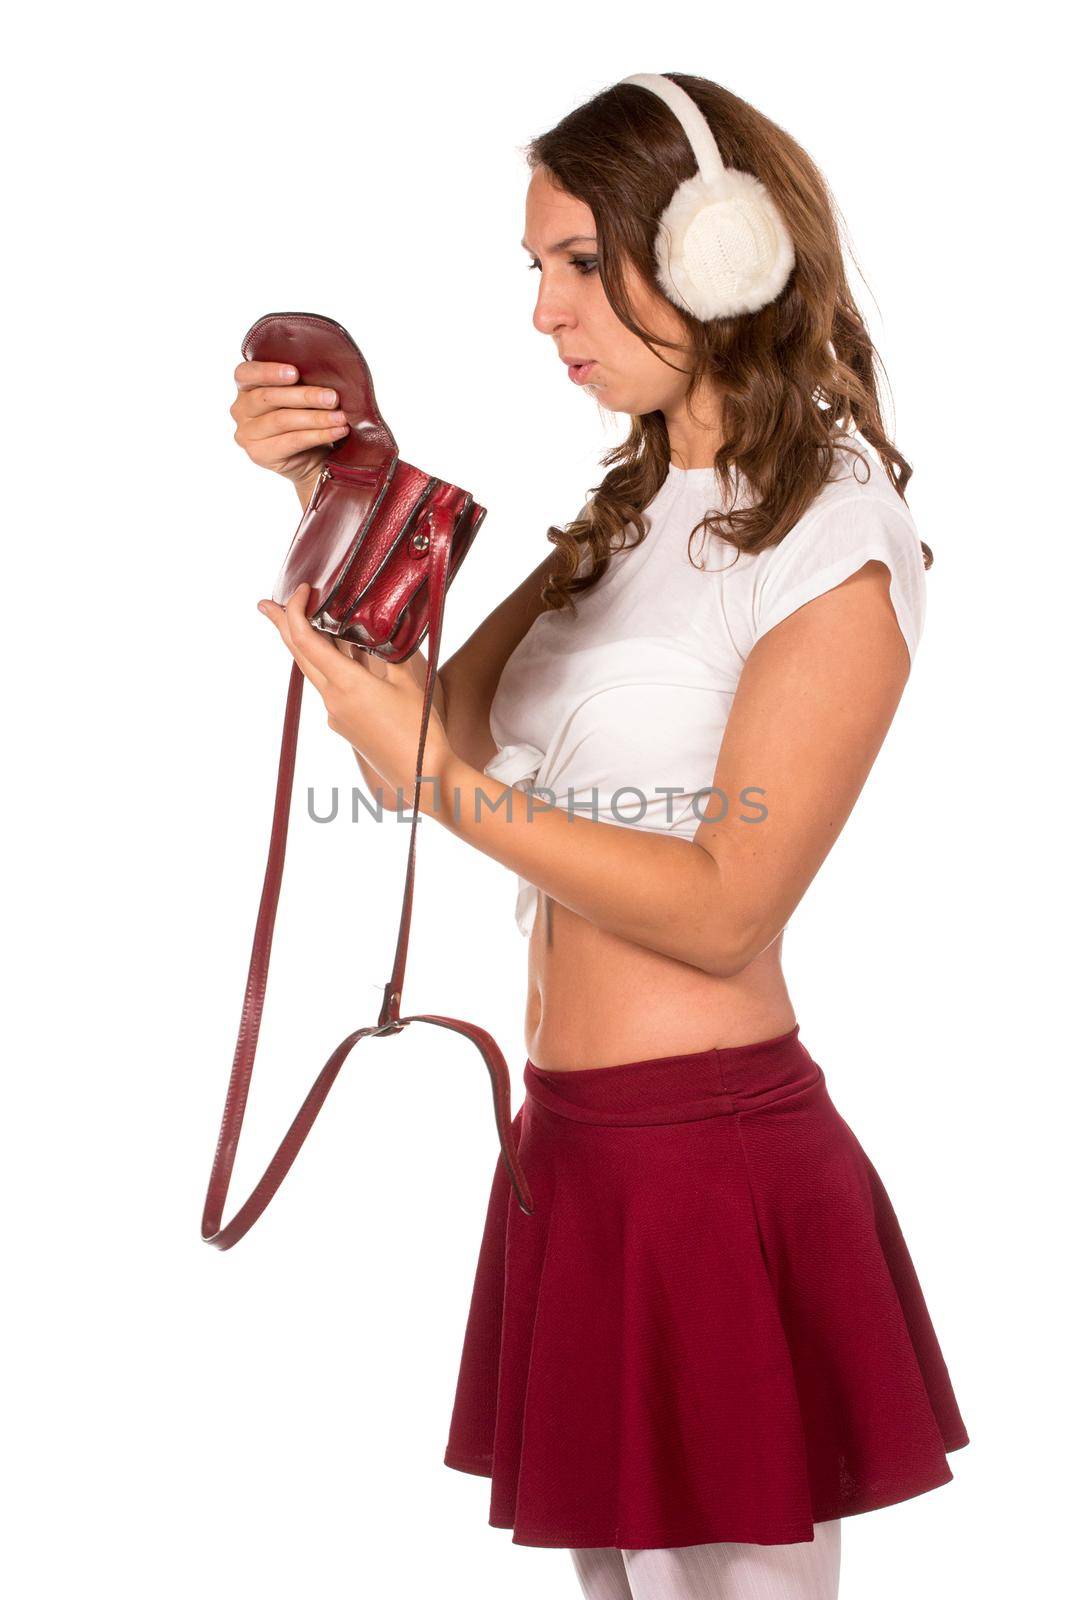 Beautiful woman looking through her pocket book purse, isolated